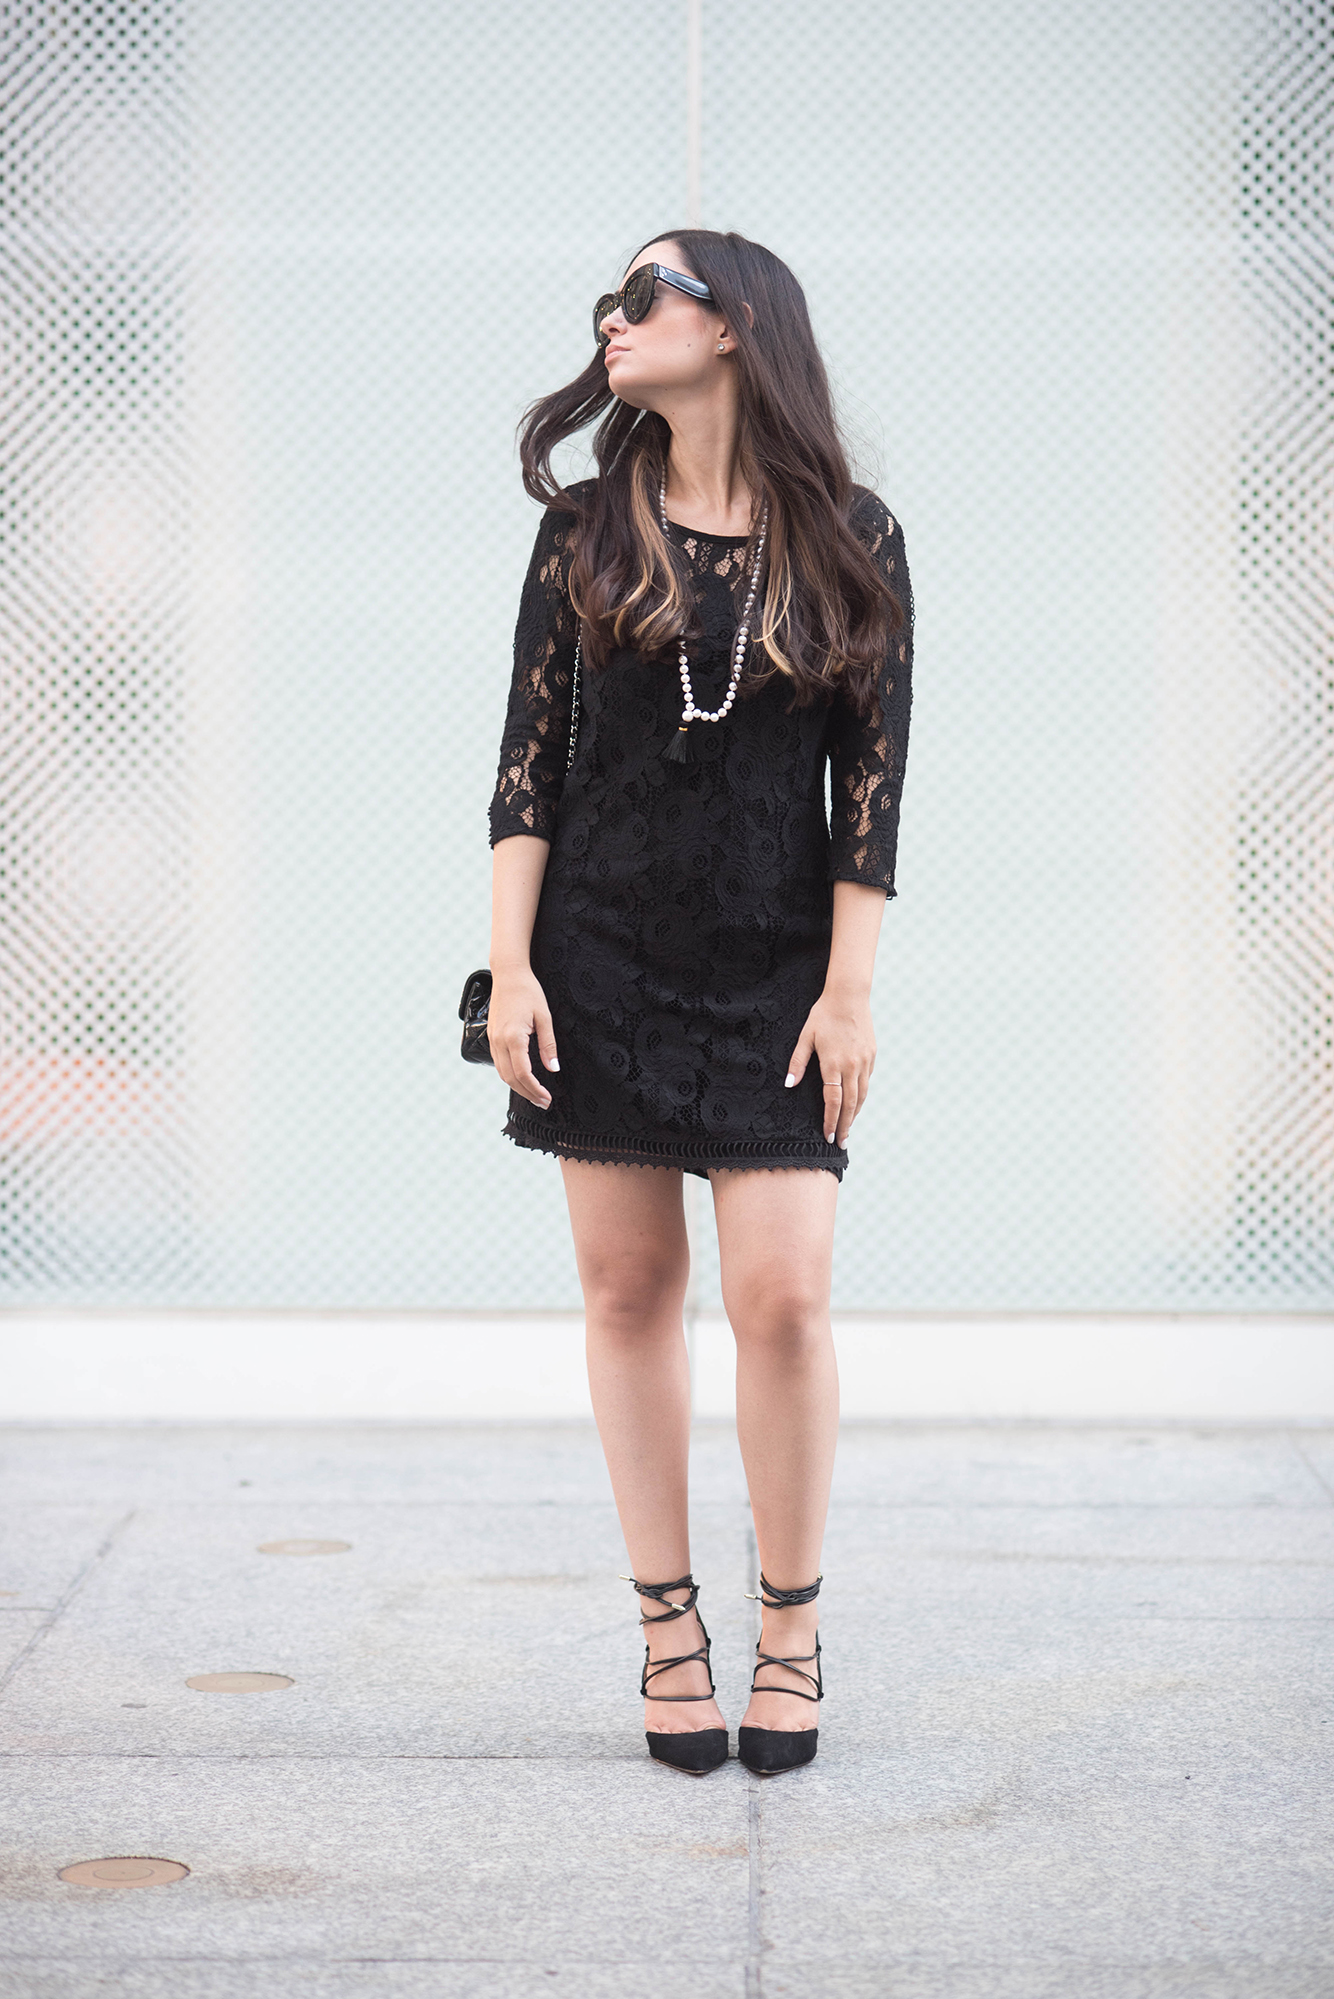 coco-and-vera-top-vancouver-fashion-blog-top-canadian-fashion-blog-top-blogger-street-style-gentlefawn-lace-dress-sam-edelman-lace-up-heels-cclifestyles-pearls-chanel-handbag-celine-sunglasses